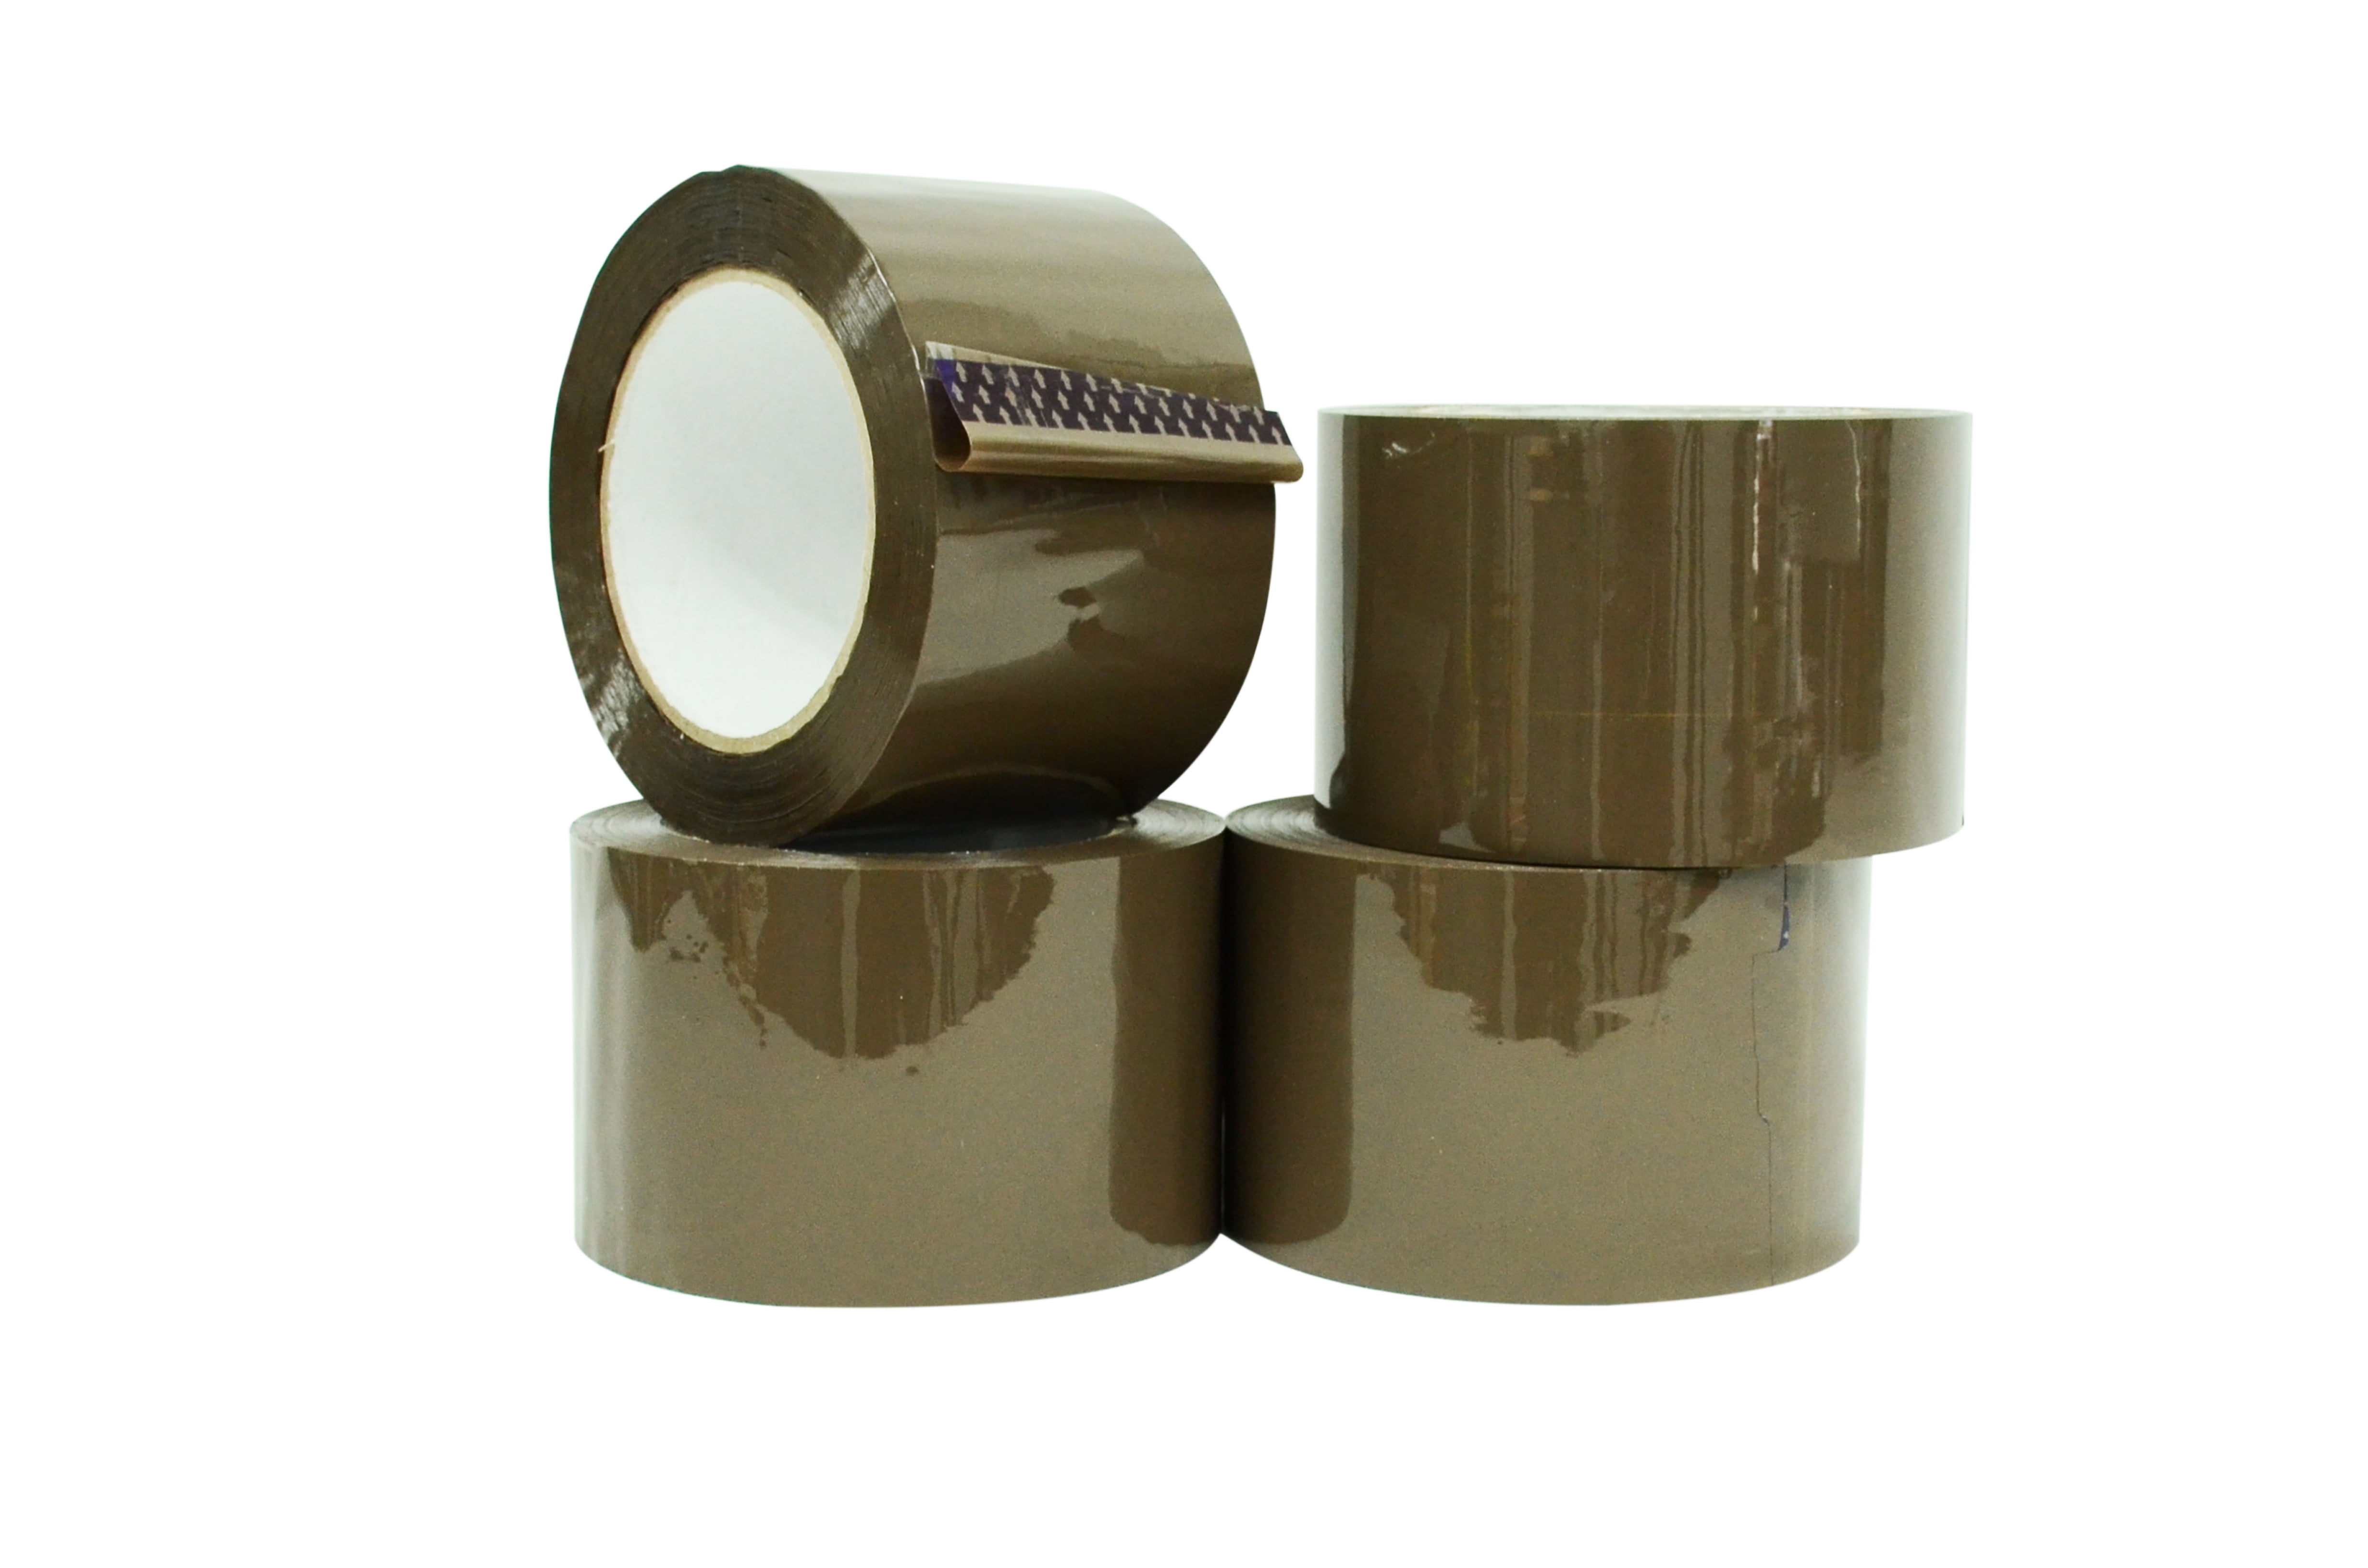 2 X Brown Tape 66m x 48mm with Heavy Duty Tape Dispenser 